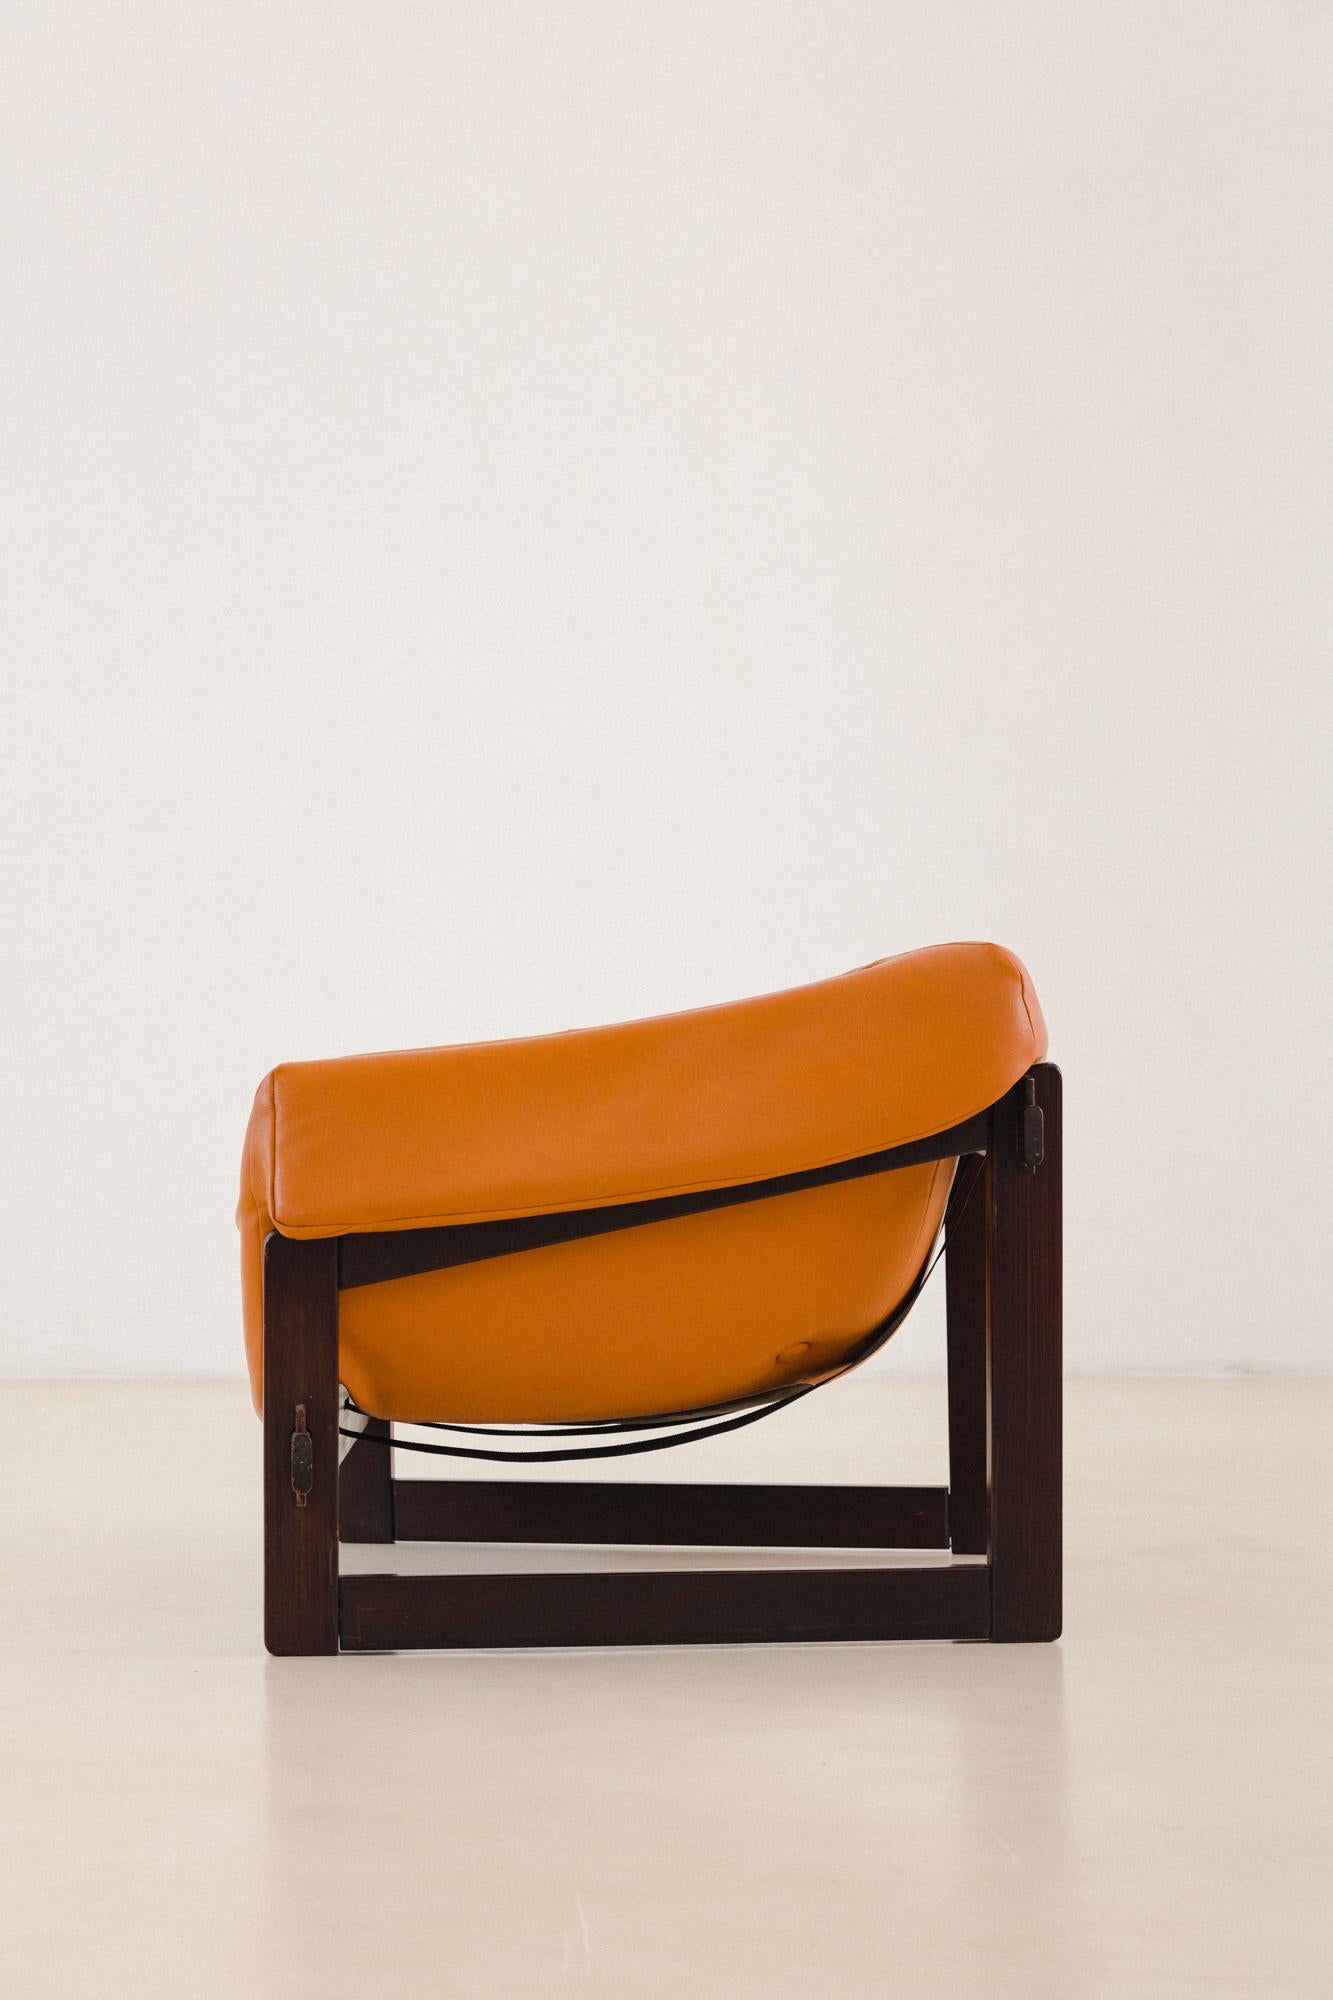 Brazilian MP-91 Midcentury Lounge Chair by Percival Lafer, 1960s For Sale